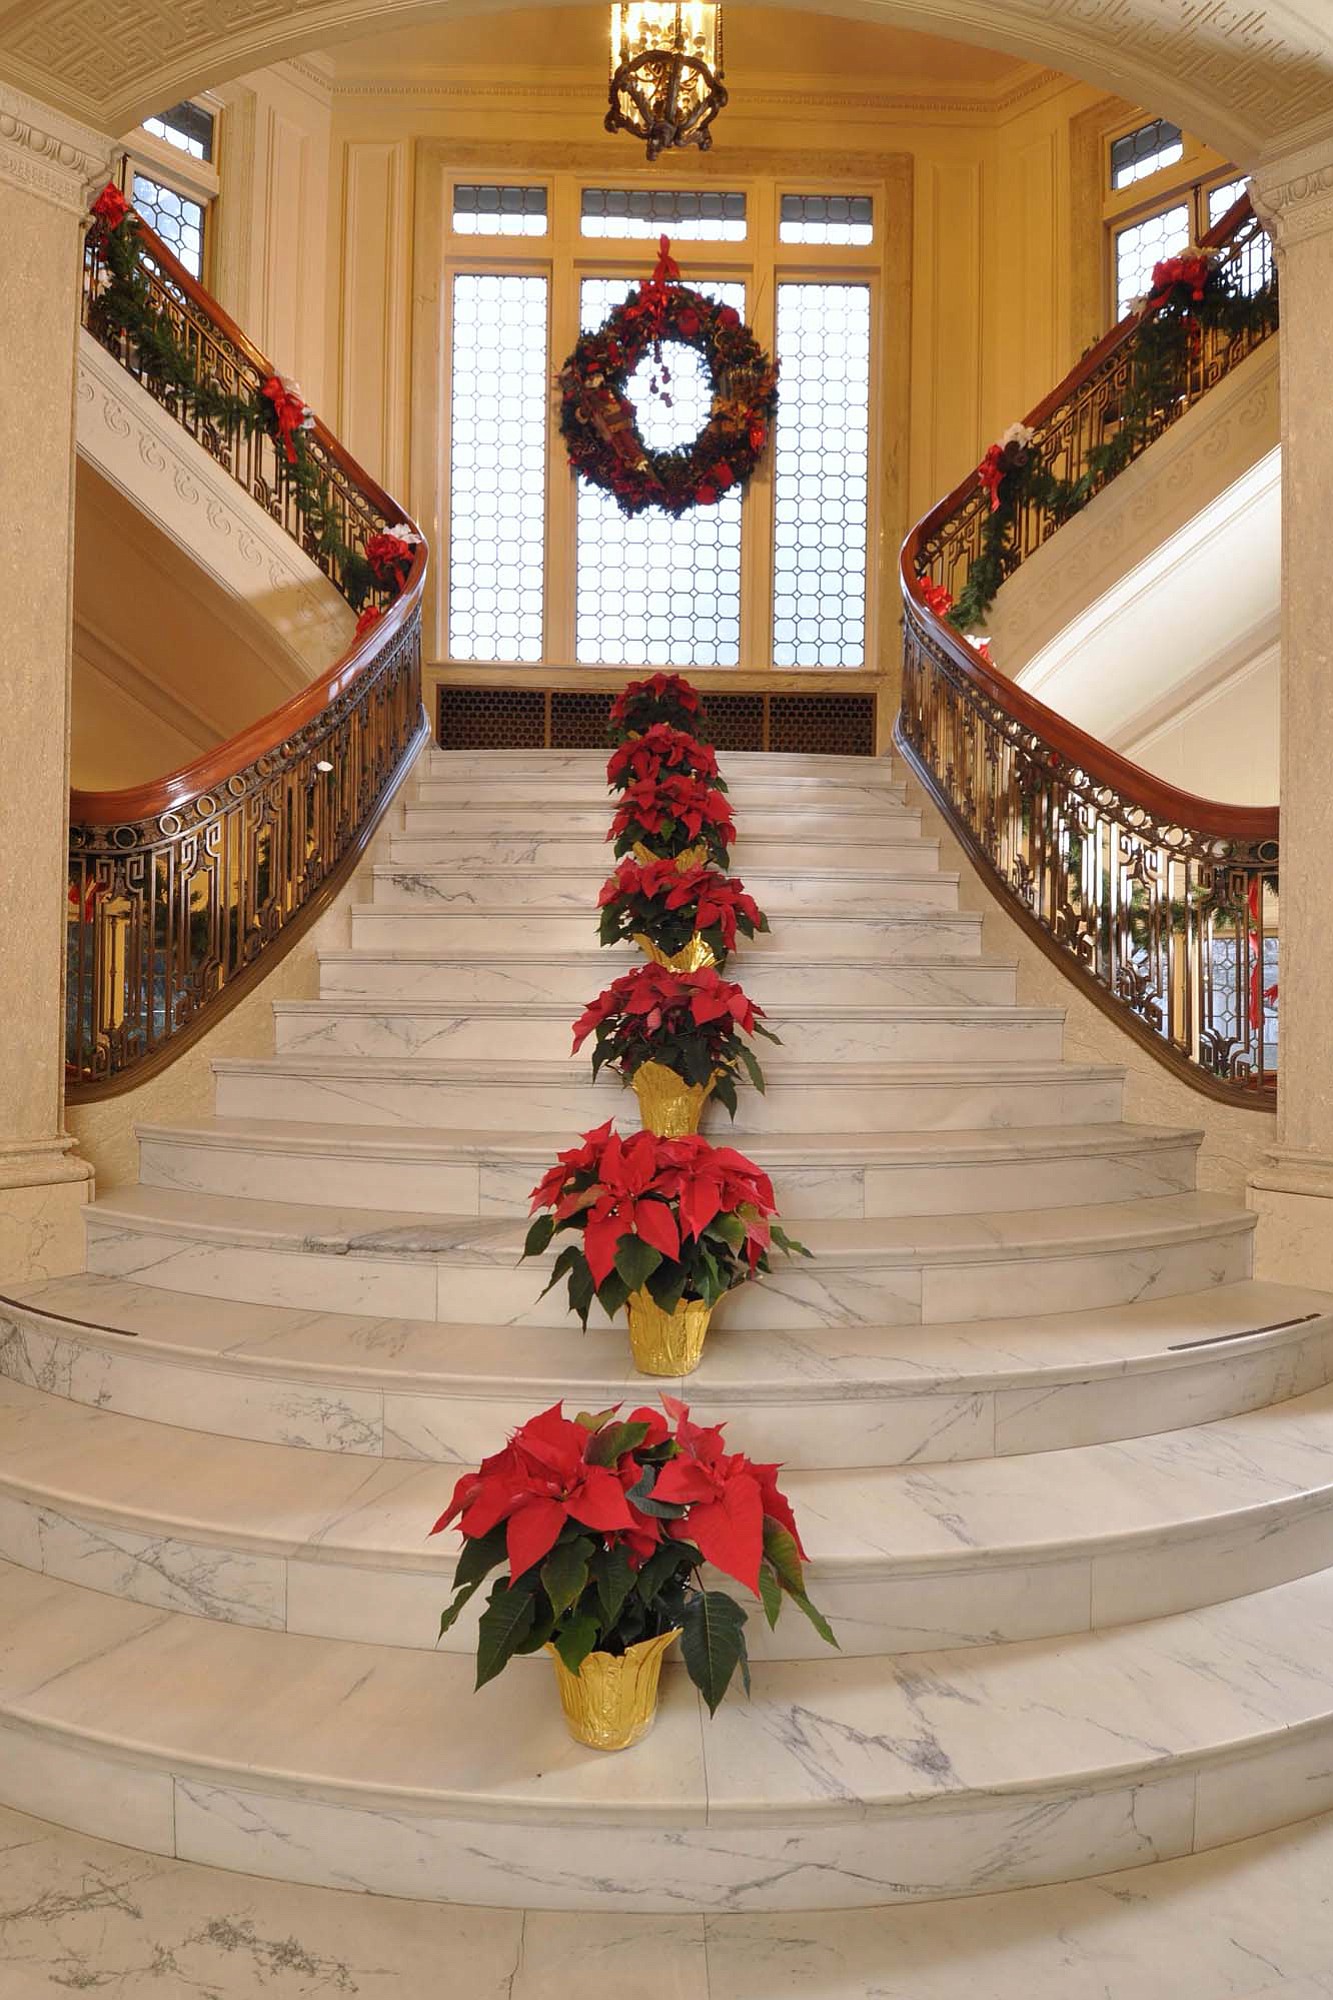 The Pittock Mansion's annual holiday exhibit celebrates the landmark's &quot;Christmas Past, Present and Future&quot; through Jan.